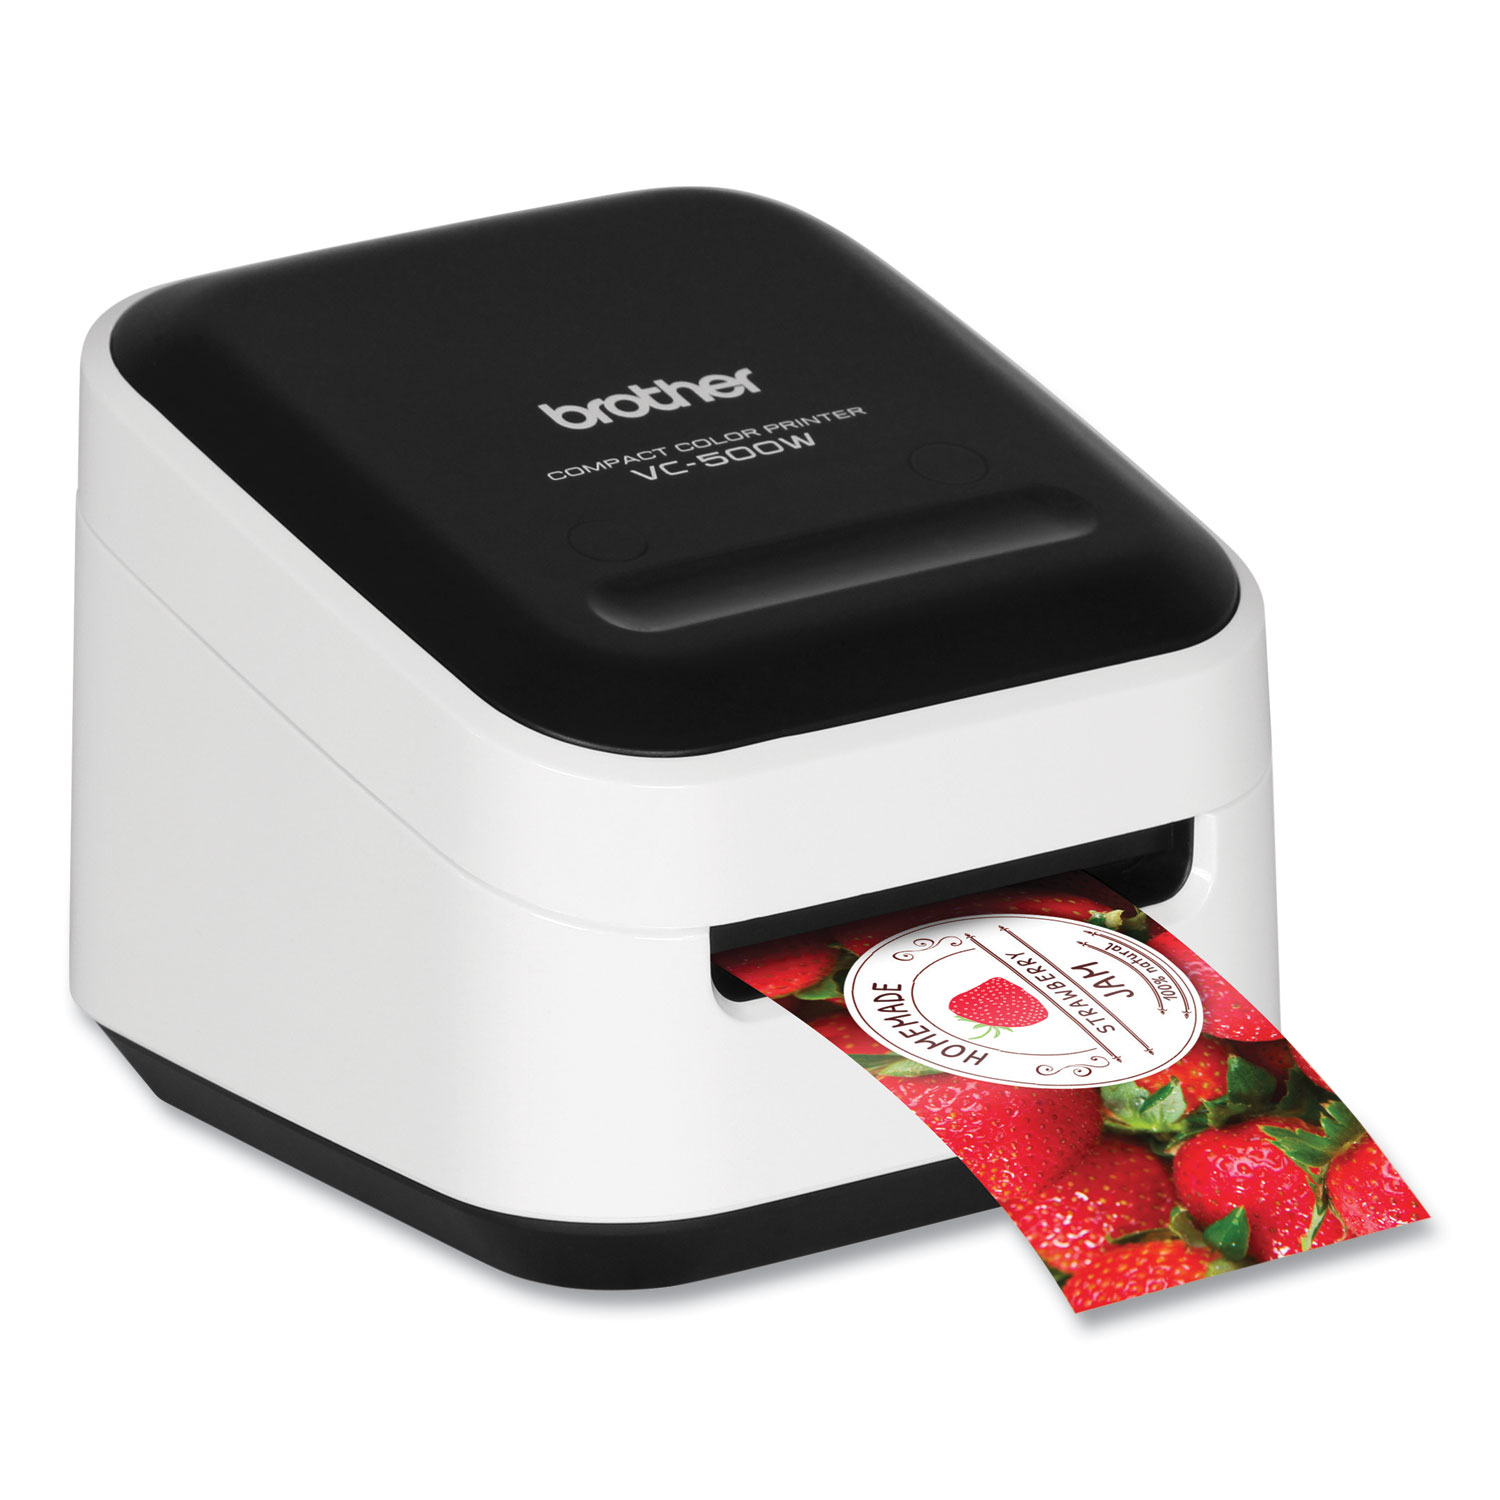 VC-500W Versatile Compact Color Label and Photo Printer with Networking, 7.5 mm/s Print Speed, 4.4 x 4.6 x 3.8 - BOSS Office and Computer